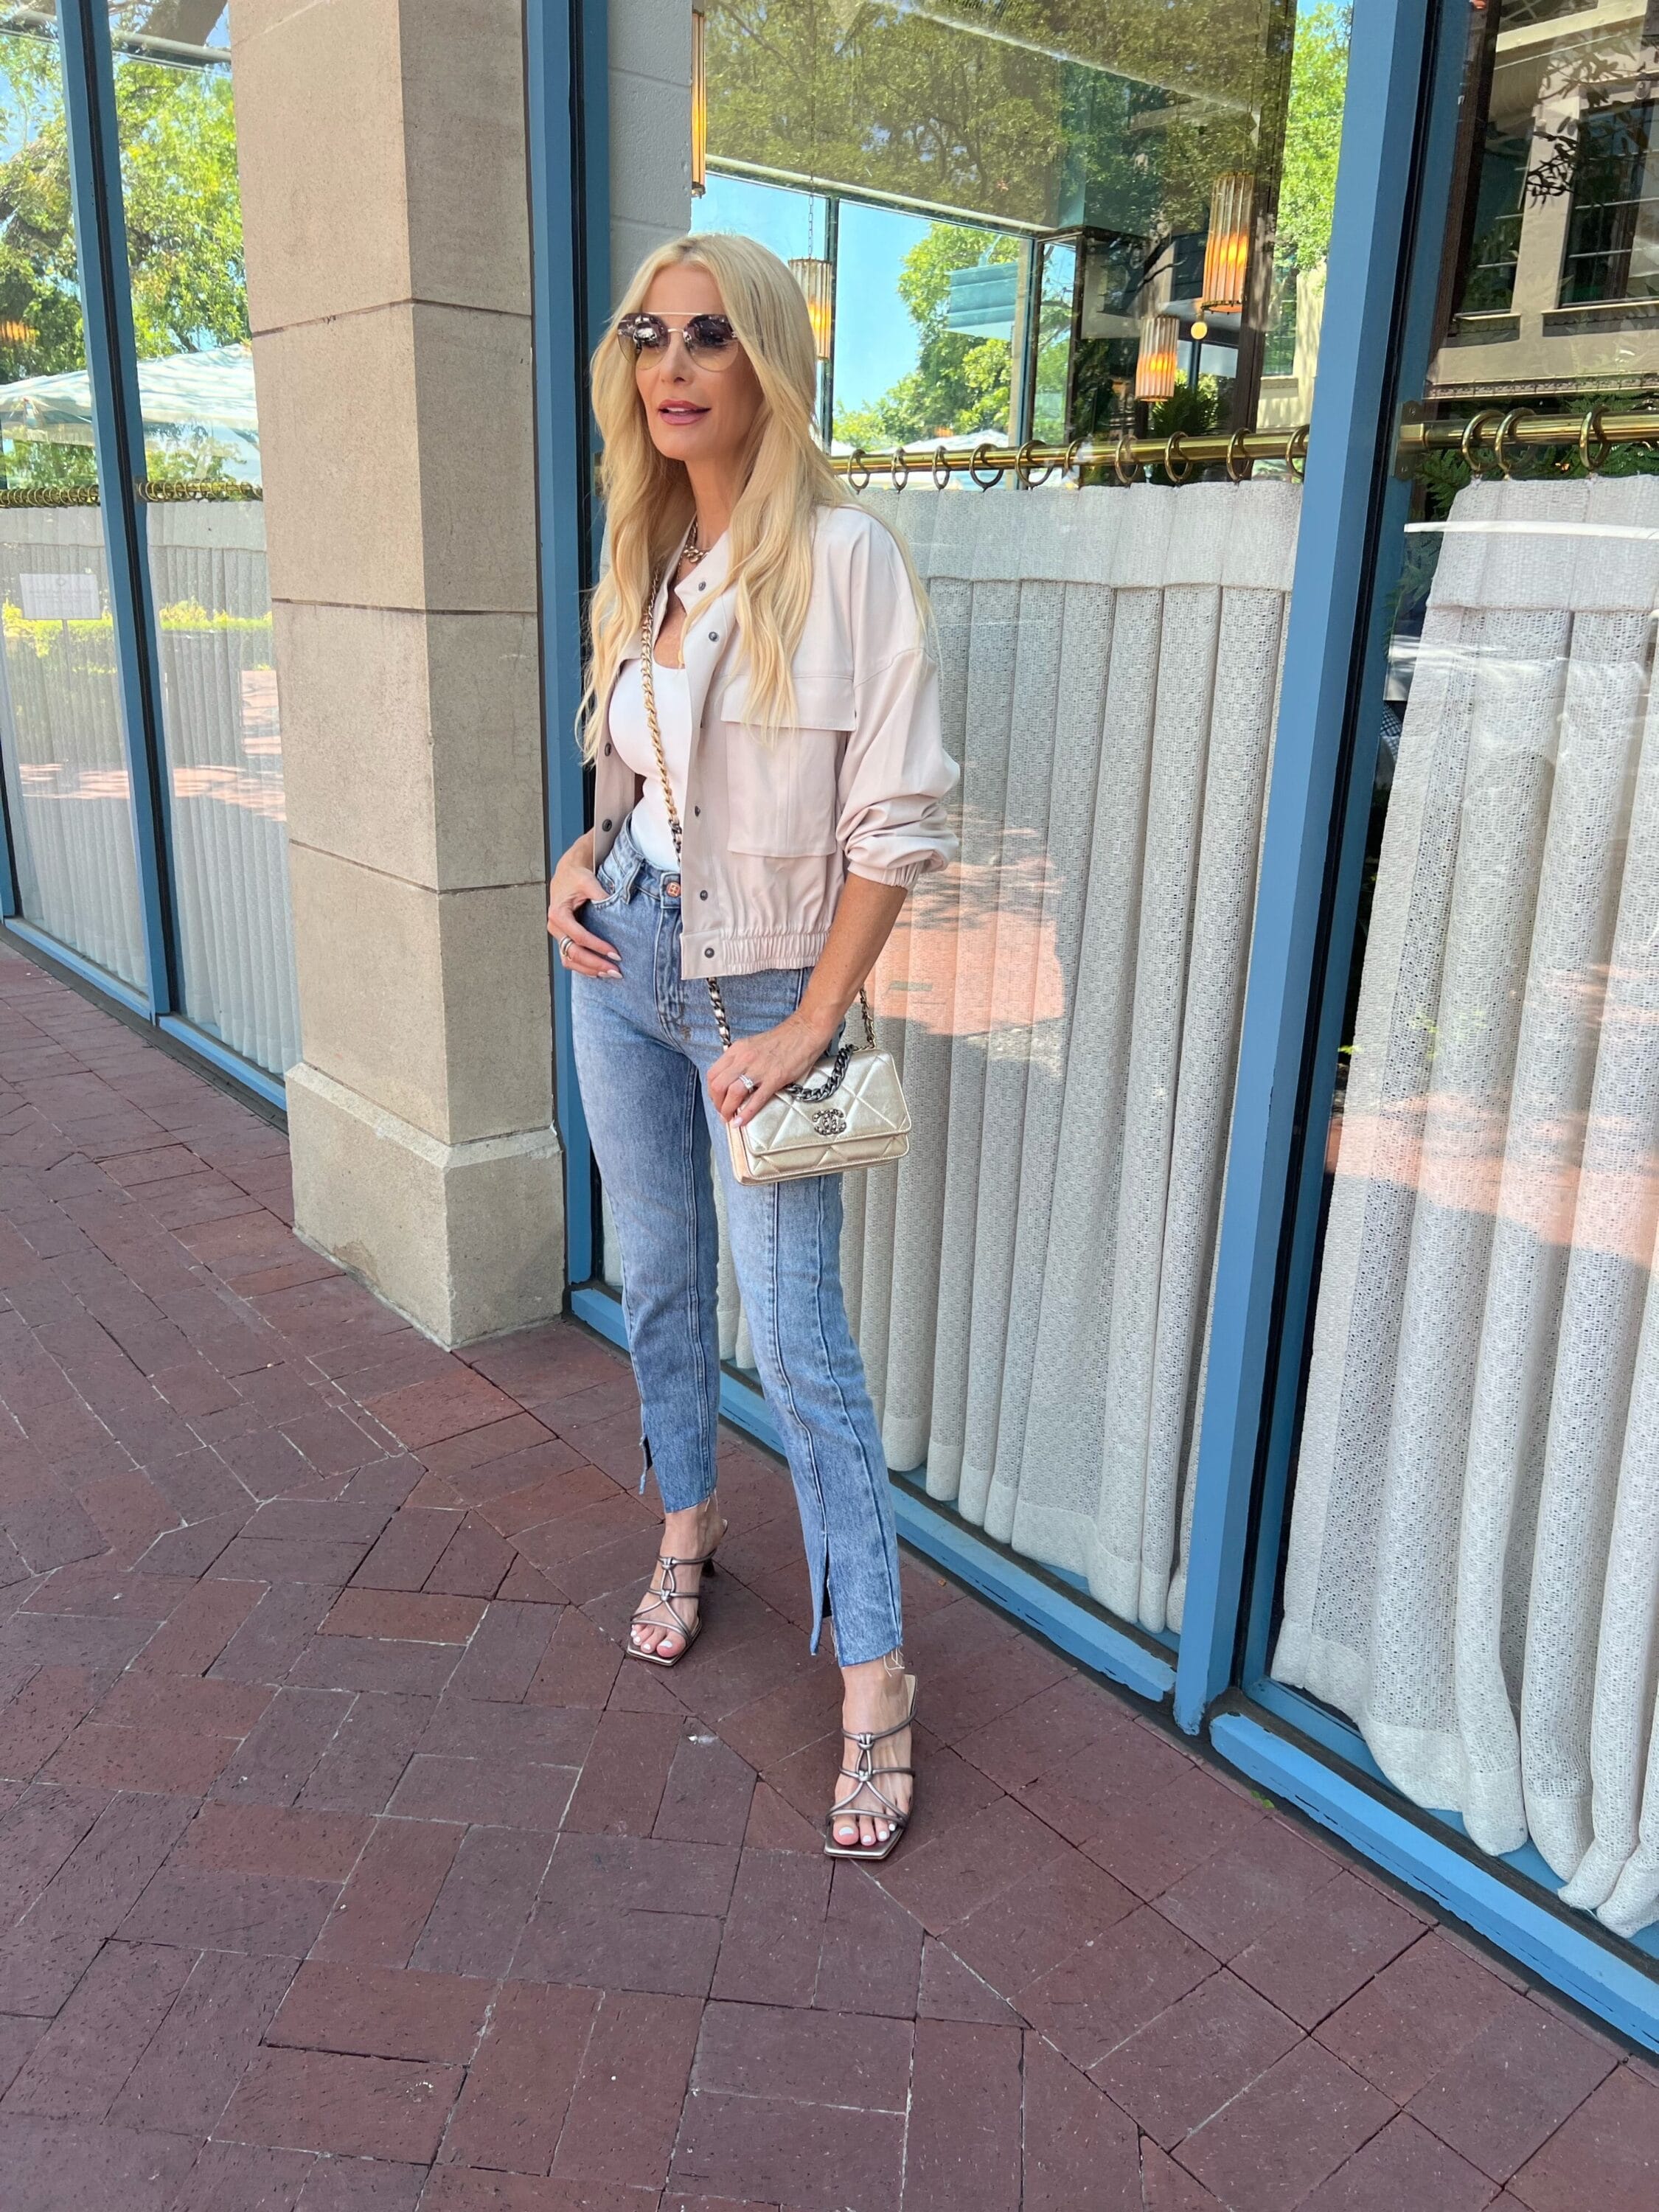 Dallas fashion blogger showcasing summer outfits for women over 40